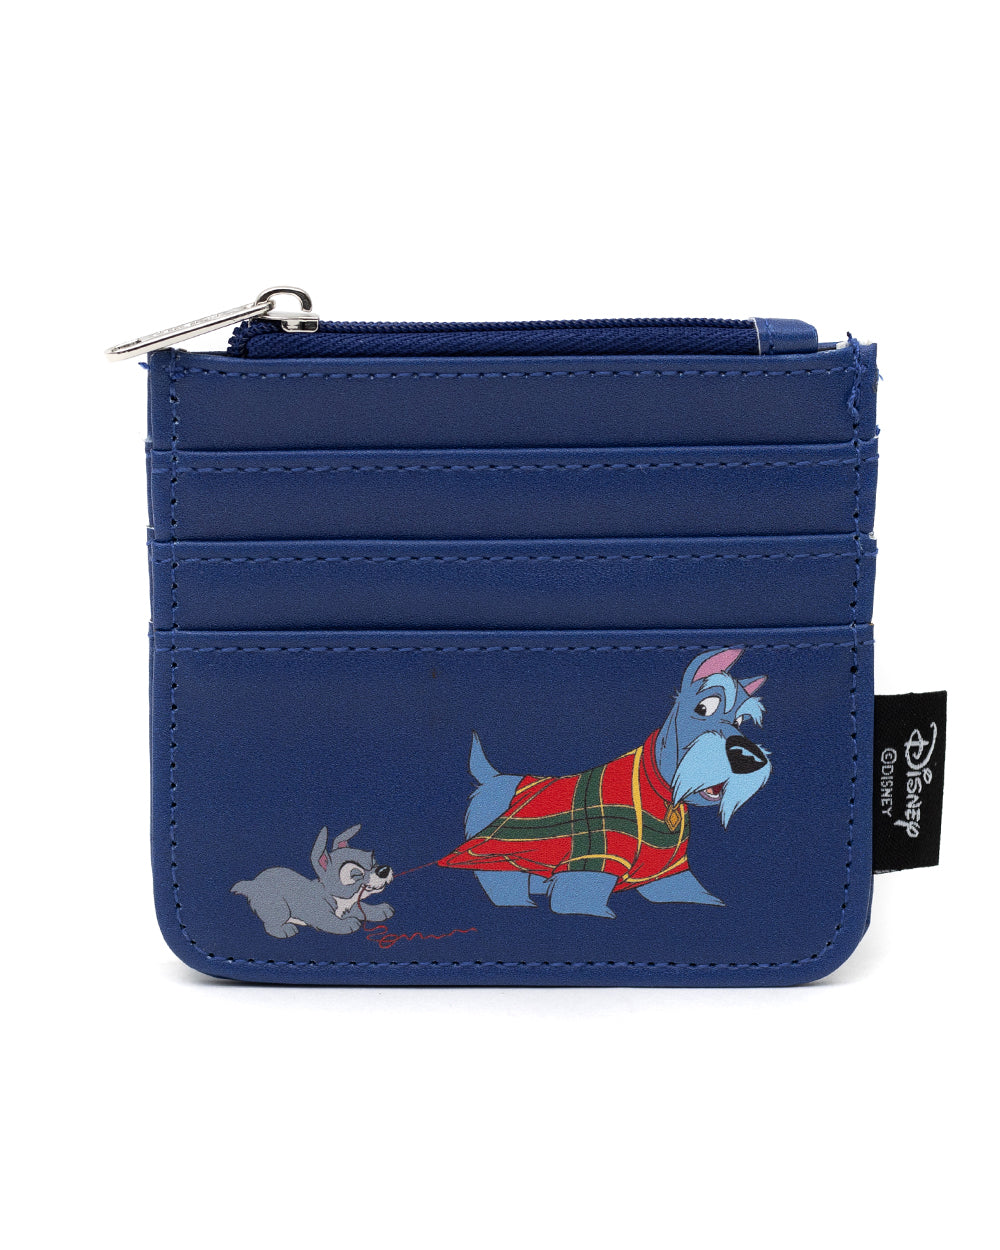 Disney Lady and the Tramp Cardholder - FINAL SALE